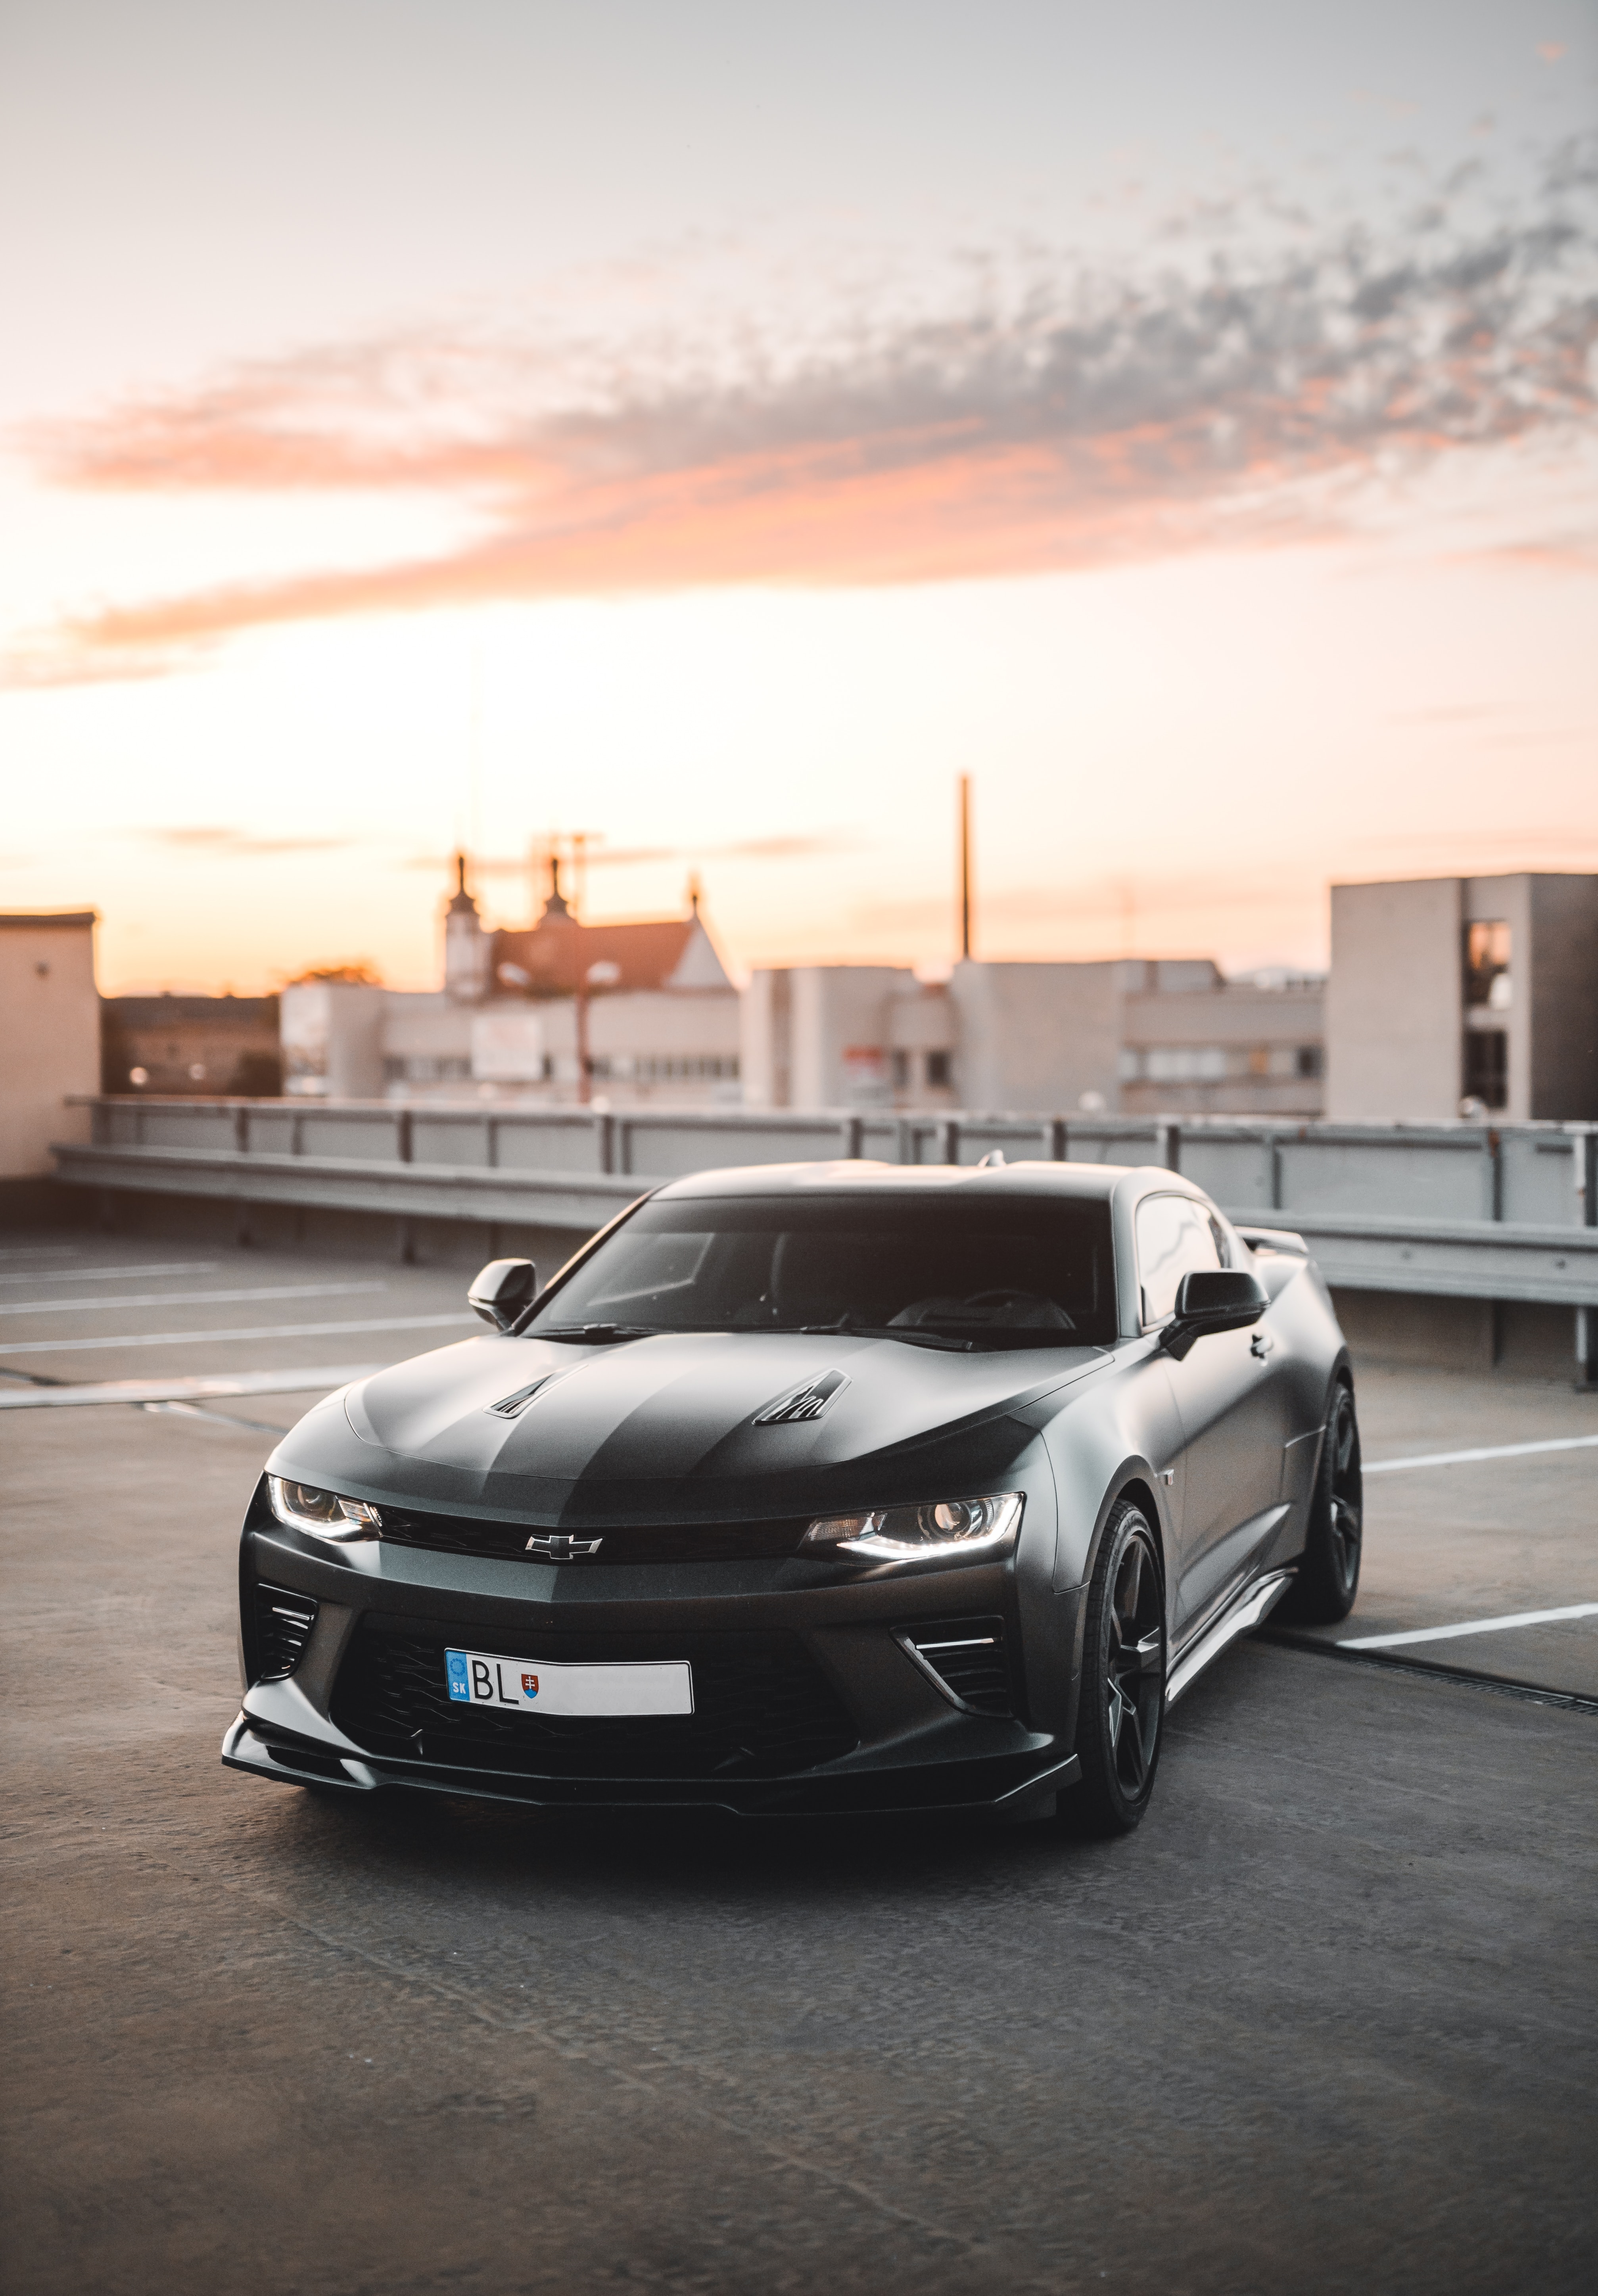 Wallpapers wallpaper chevrolet camaro front view black muscle cars on the desktop